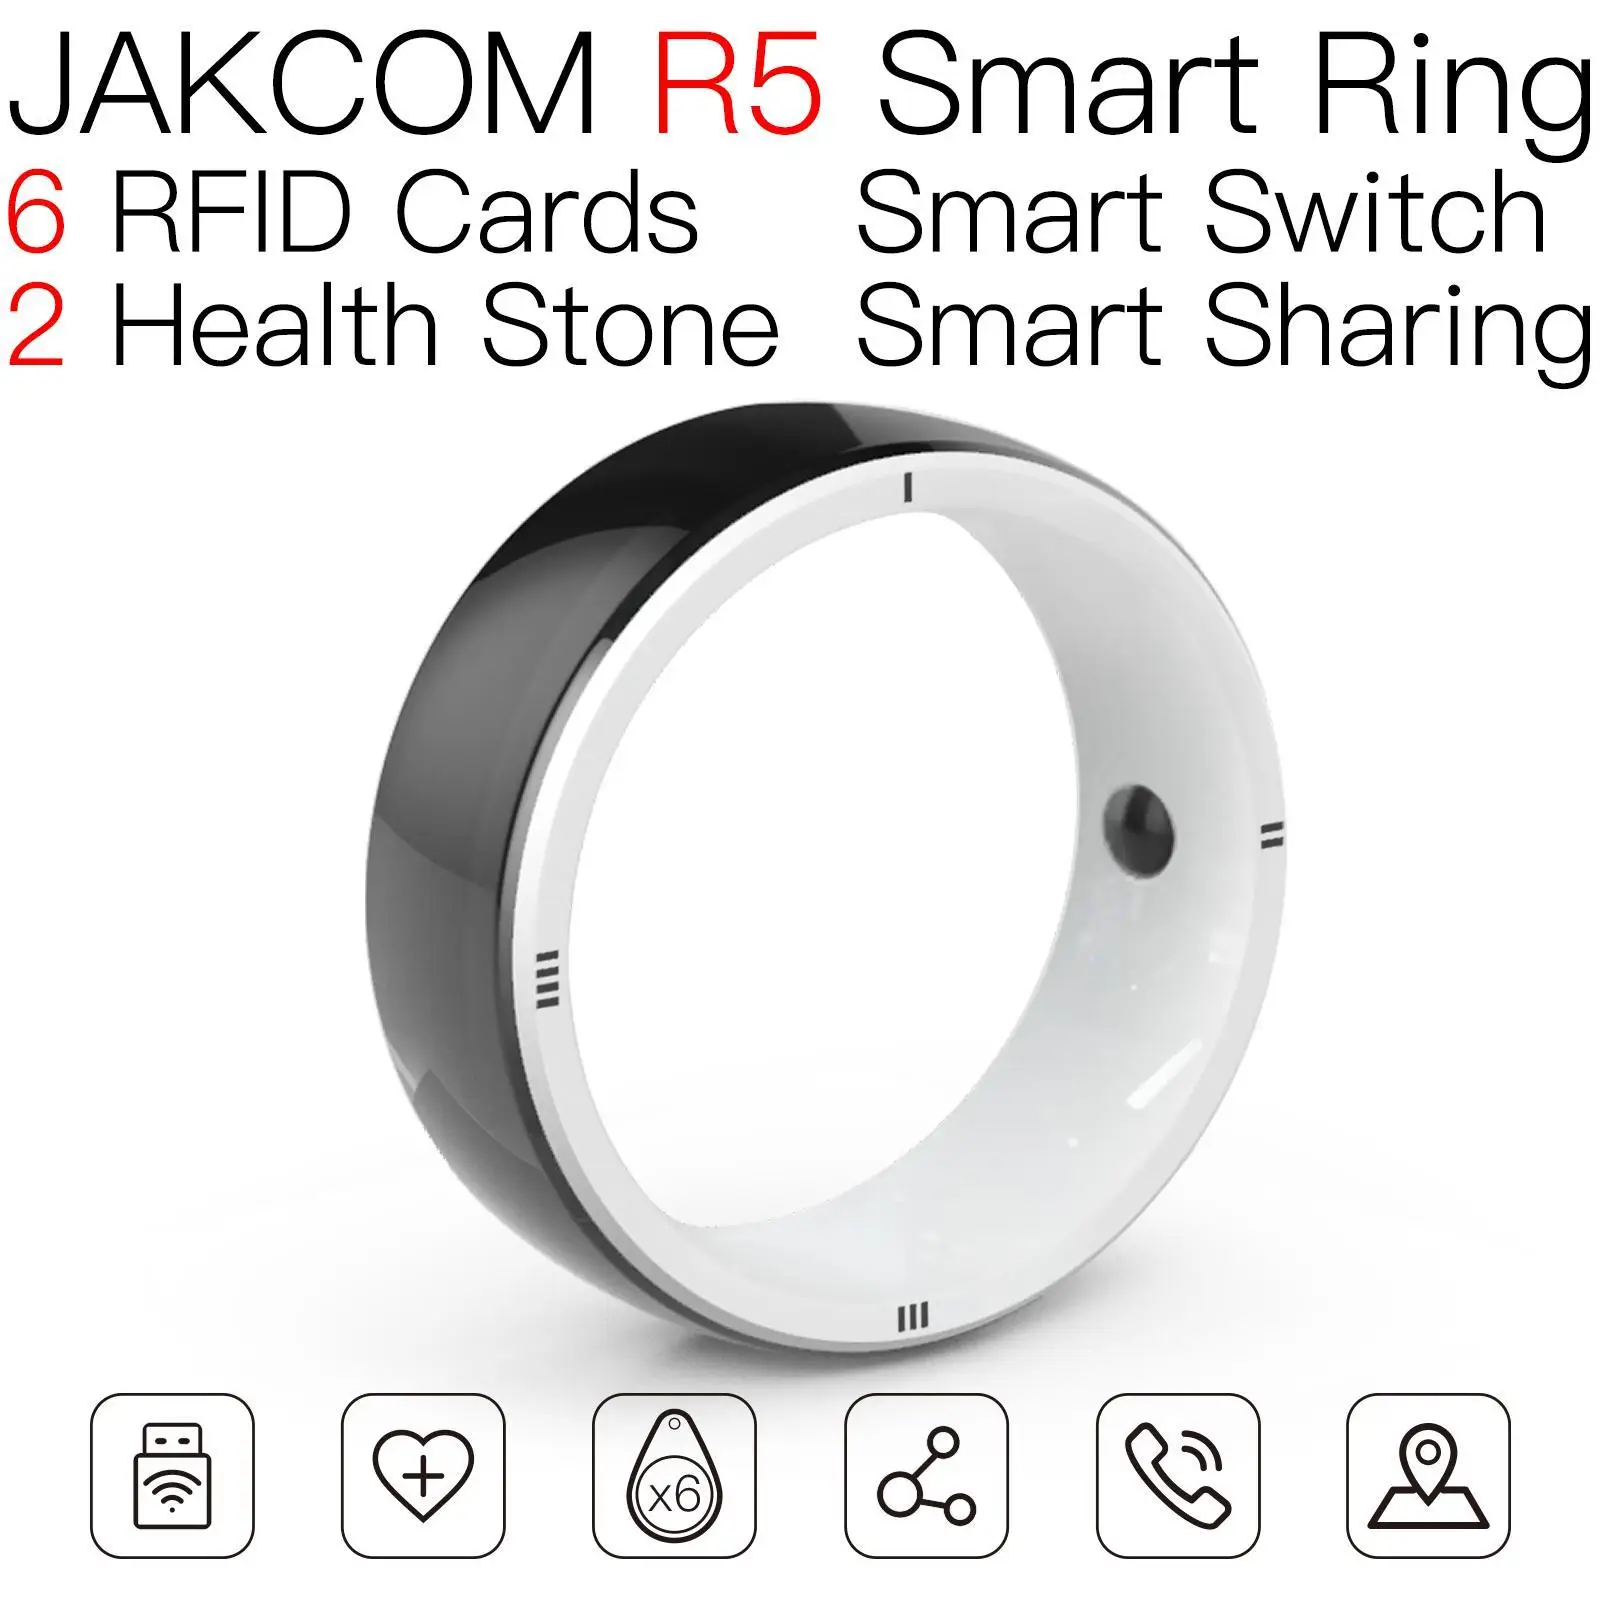 

JAKCOM R5 Smart Ring Super value as ntag215 nfc cards reader microchip flipper card code m1 chip rfid tags watch free software